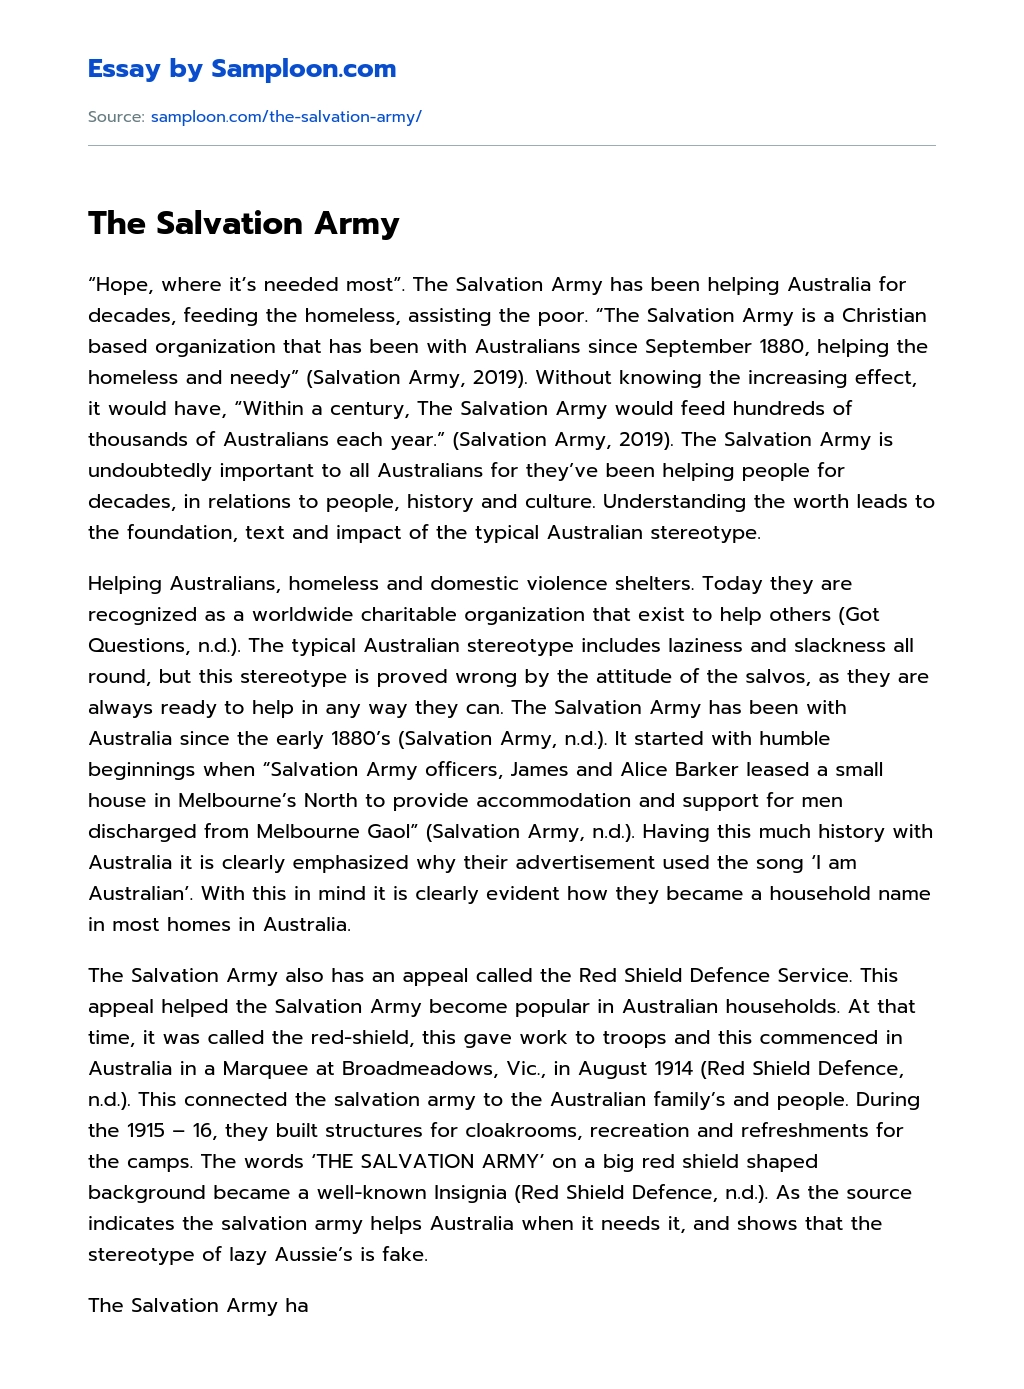 The Salvation Army essay